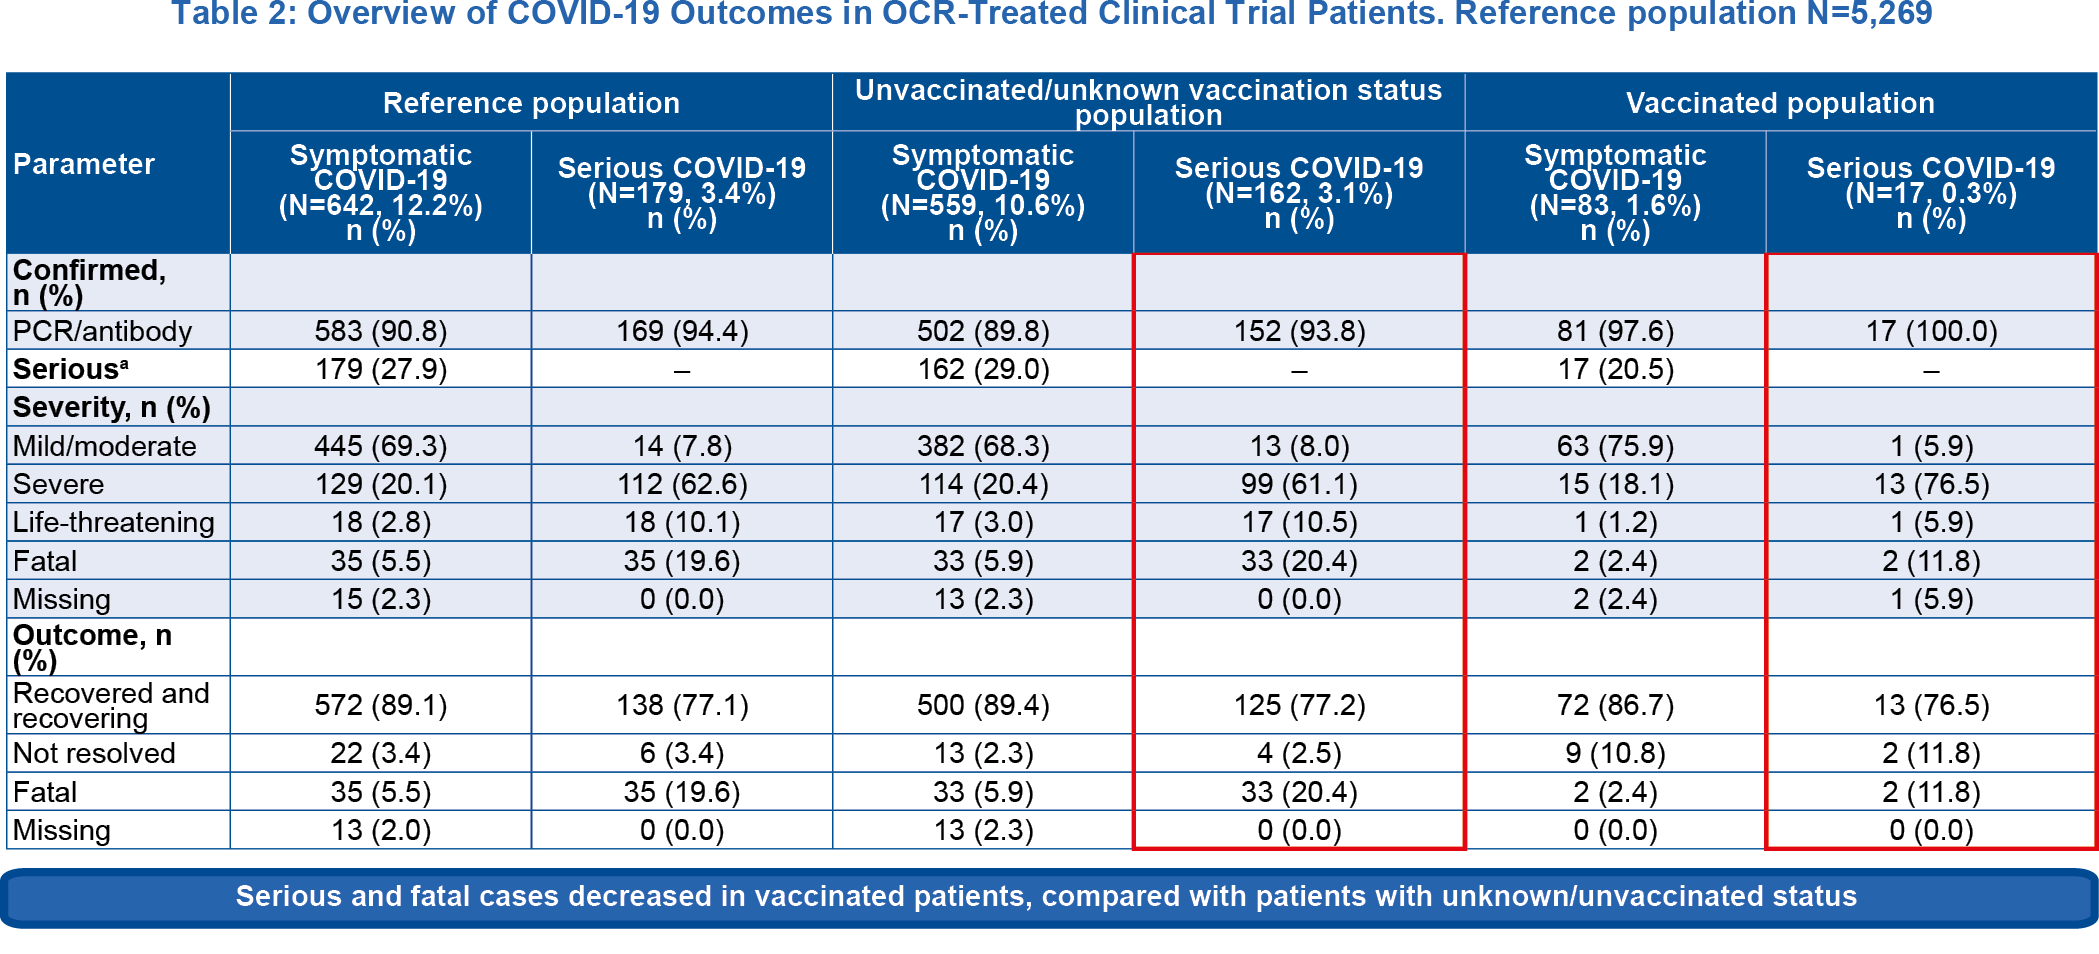 OCR-treated clinical trial patients covid-19 outcomes